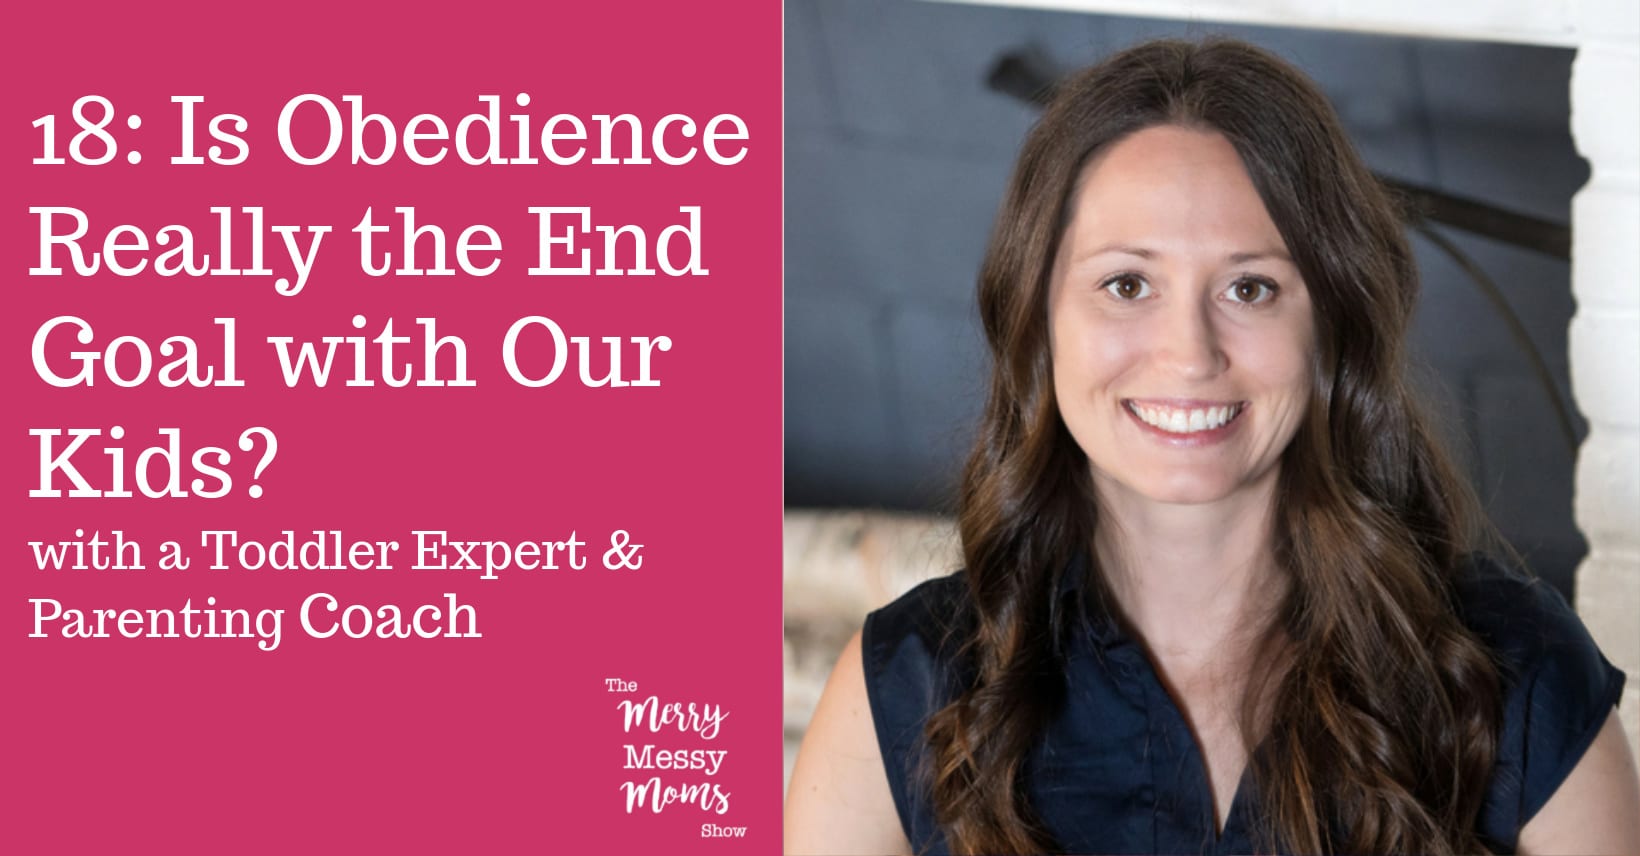 Is Obedience Really the End Goal with Our Kids? Podcast Interview with Toddler Expert and Parenting Coach Devon Kuntzman